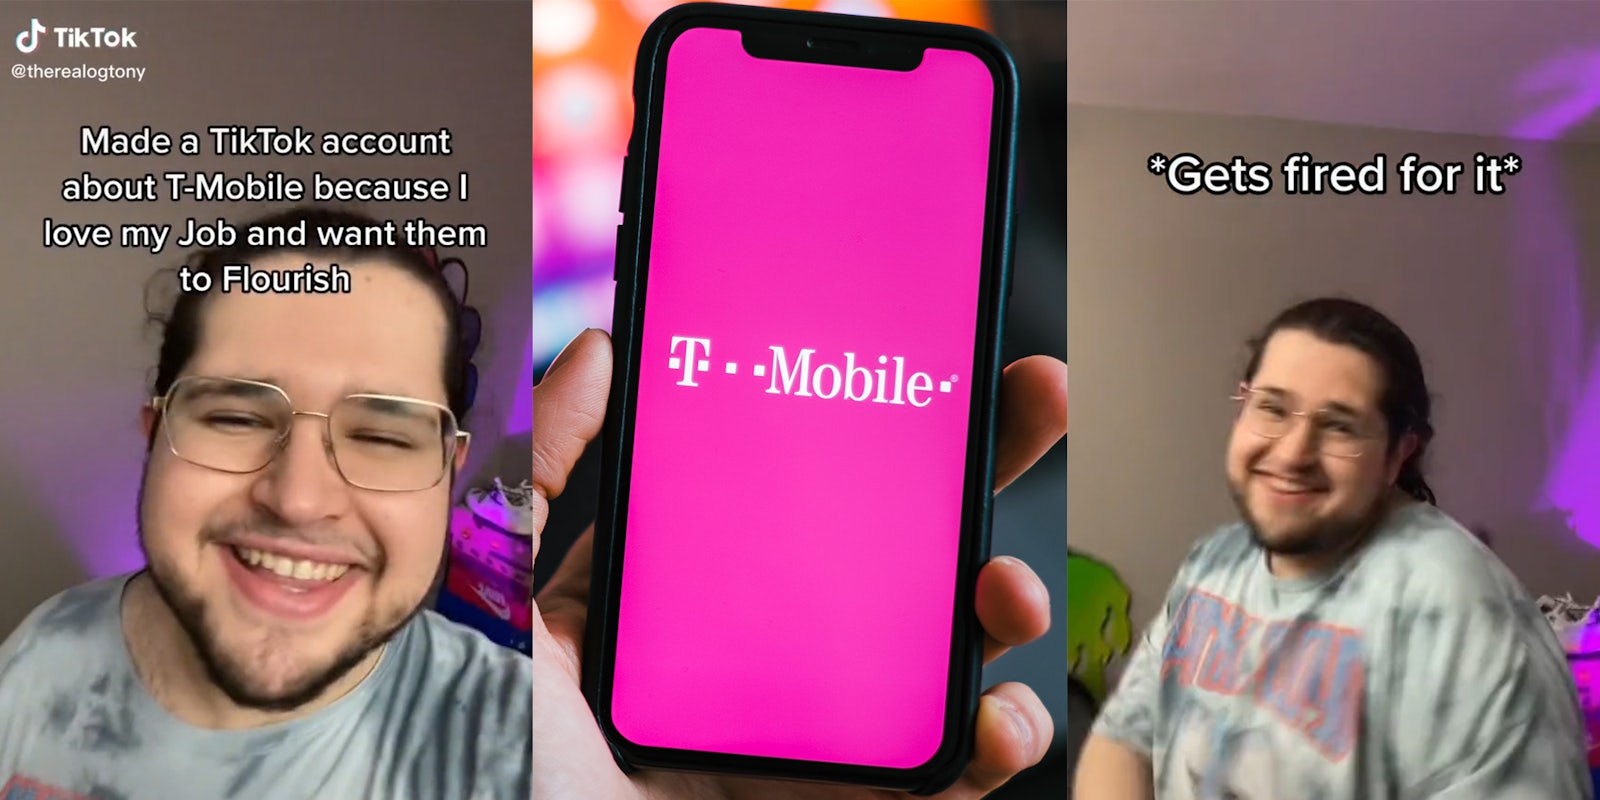 young man smiling with caption 'made a tiktok account about t-mobile because I love my job and want them to flourish' (l) hand holding phone with t-mobile logo (c) man dancing with caption 'gets fired for it' *(r)